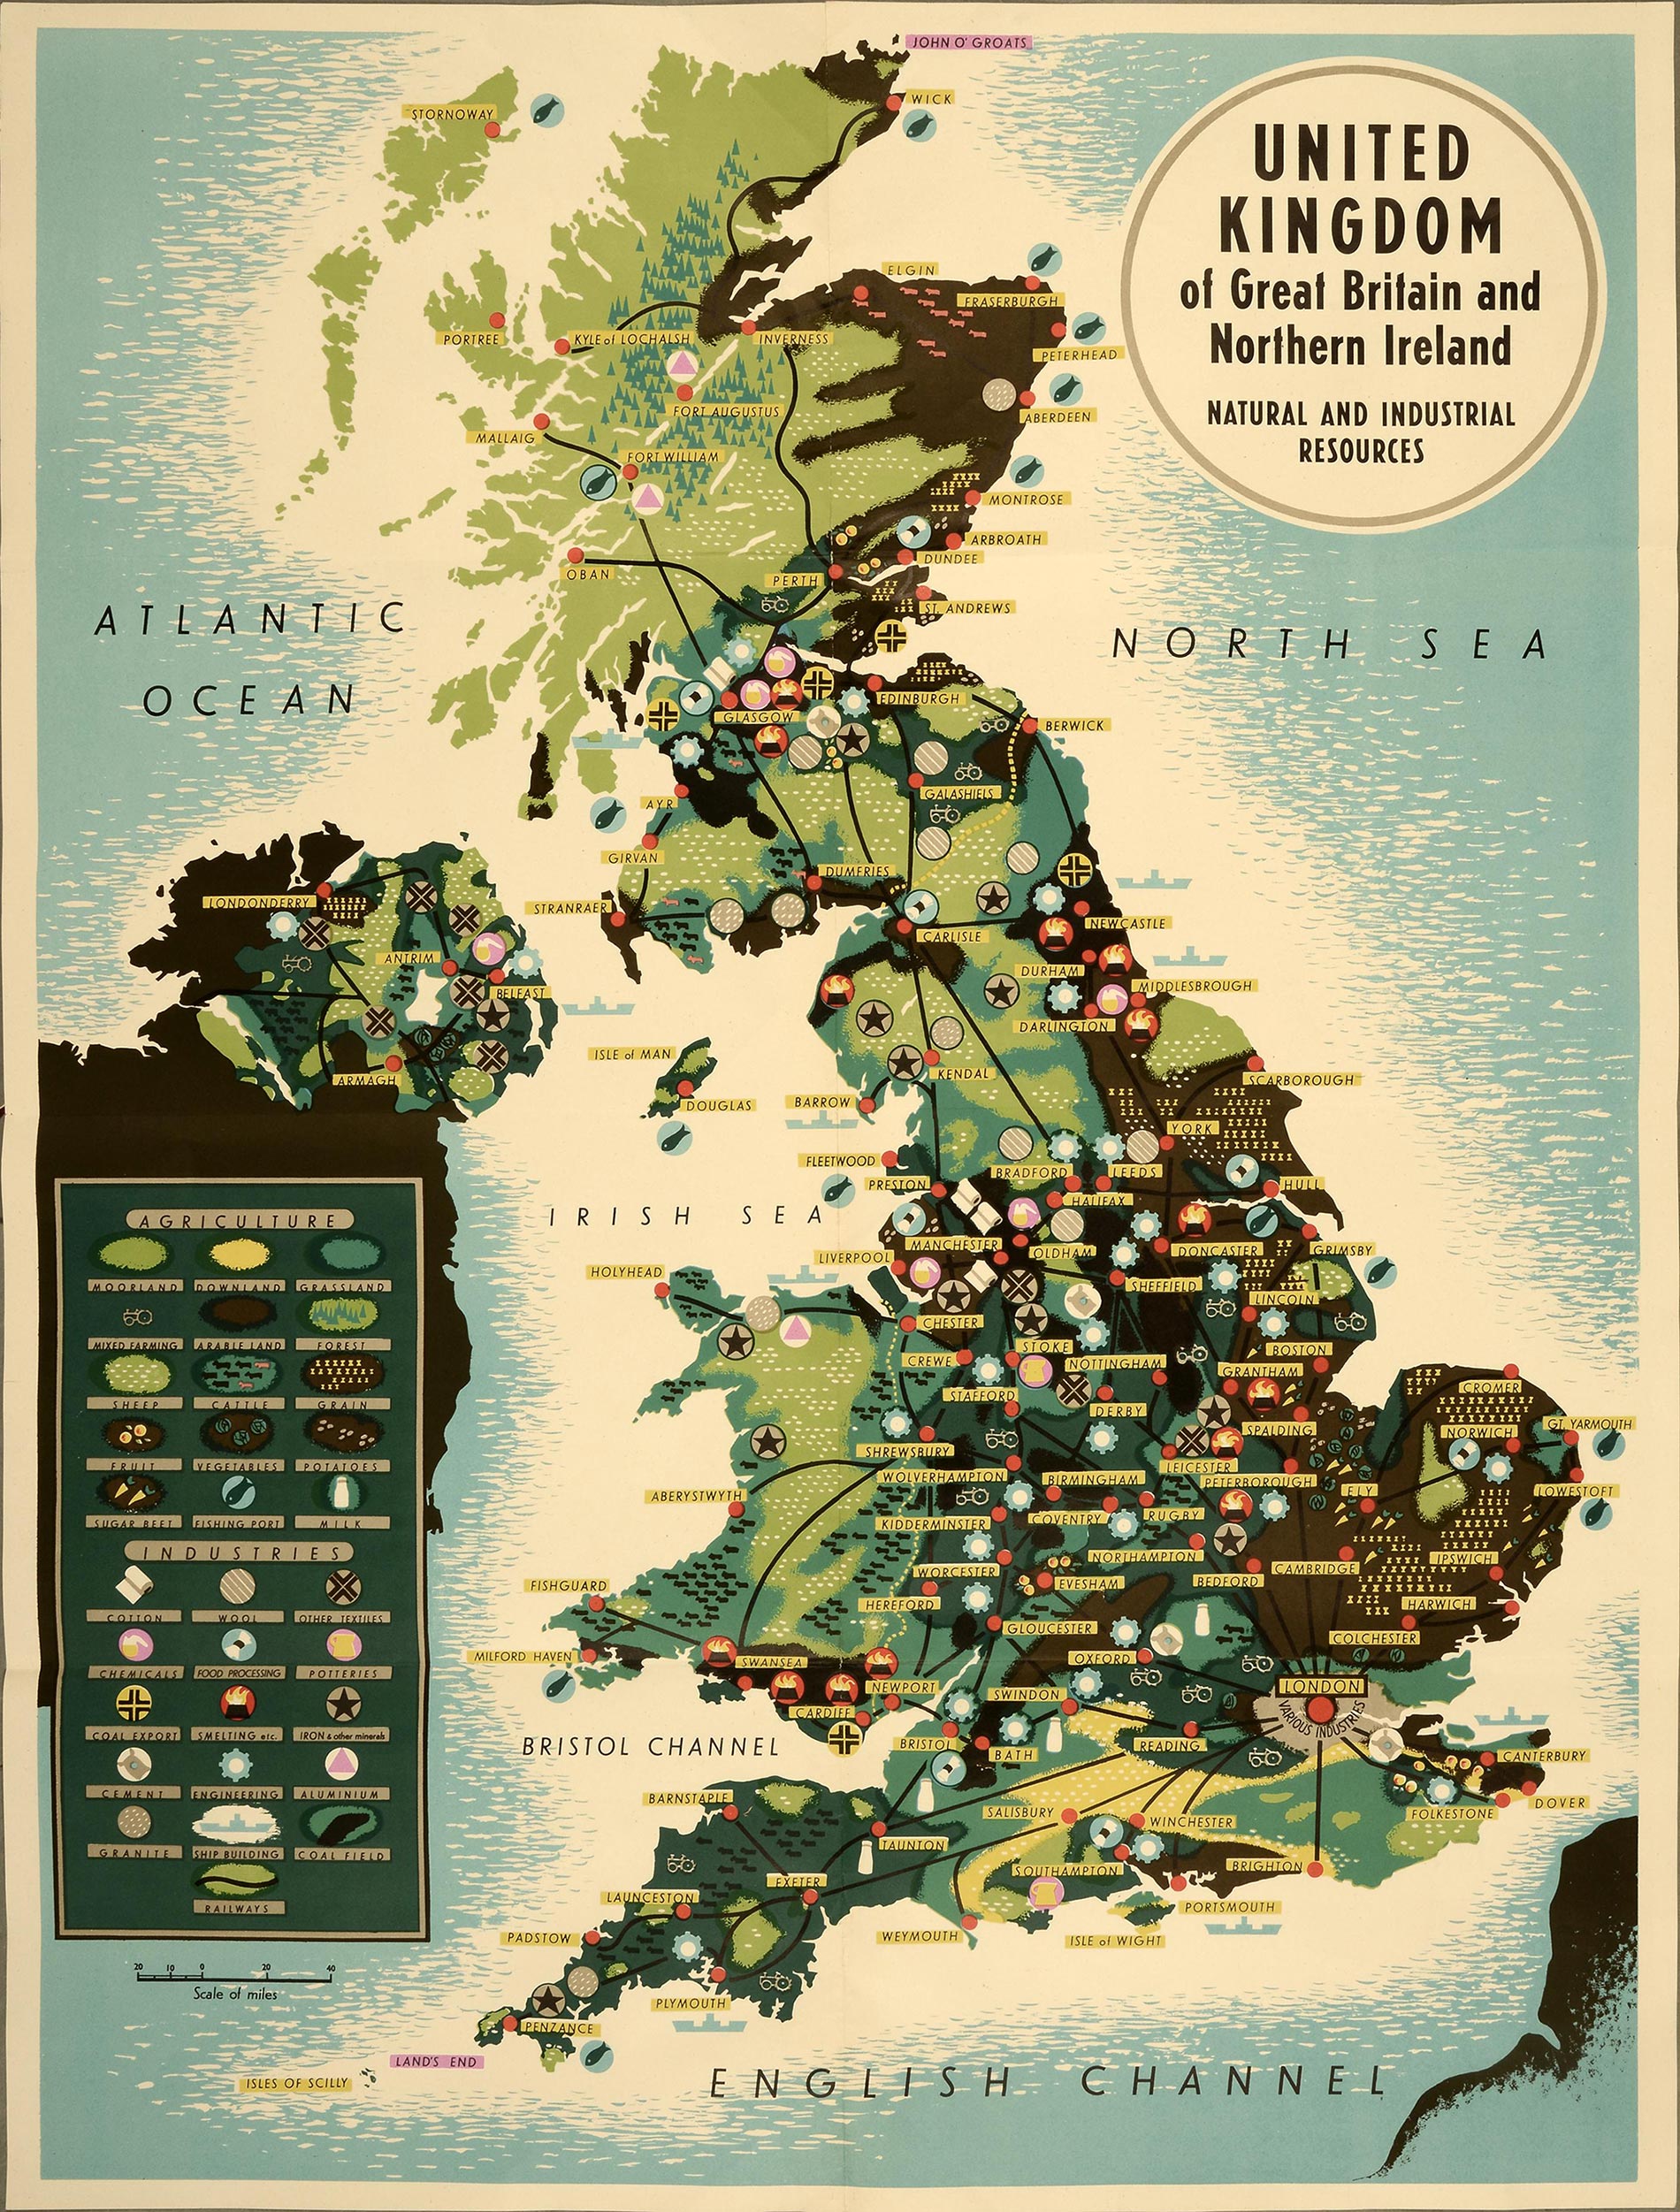 Poster featuring a map of the United Kingdom with towns and roads marked. Symbols associated with certain resources are placed around the map.